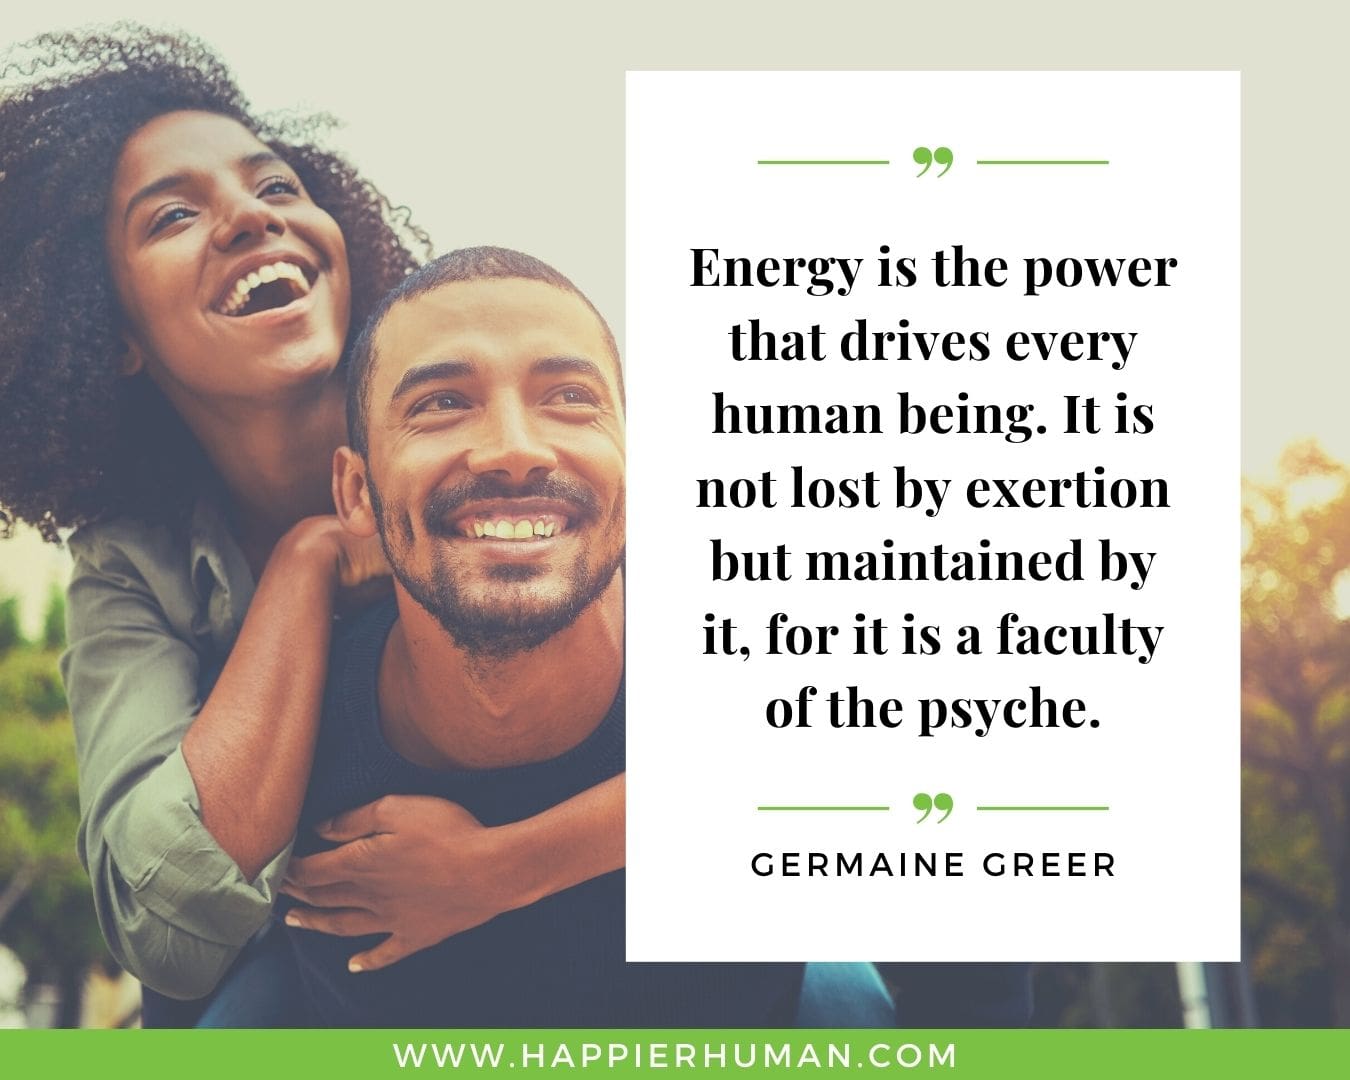 Positive Energy Quotes - “Energy is the power that drives every human being. It is not lost by exertion but maintained by it, for it is a faculty of the psyche.”- Germaine Greer